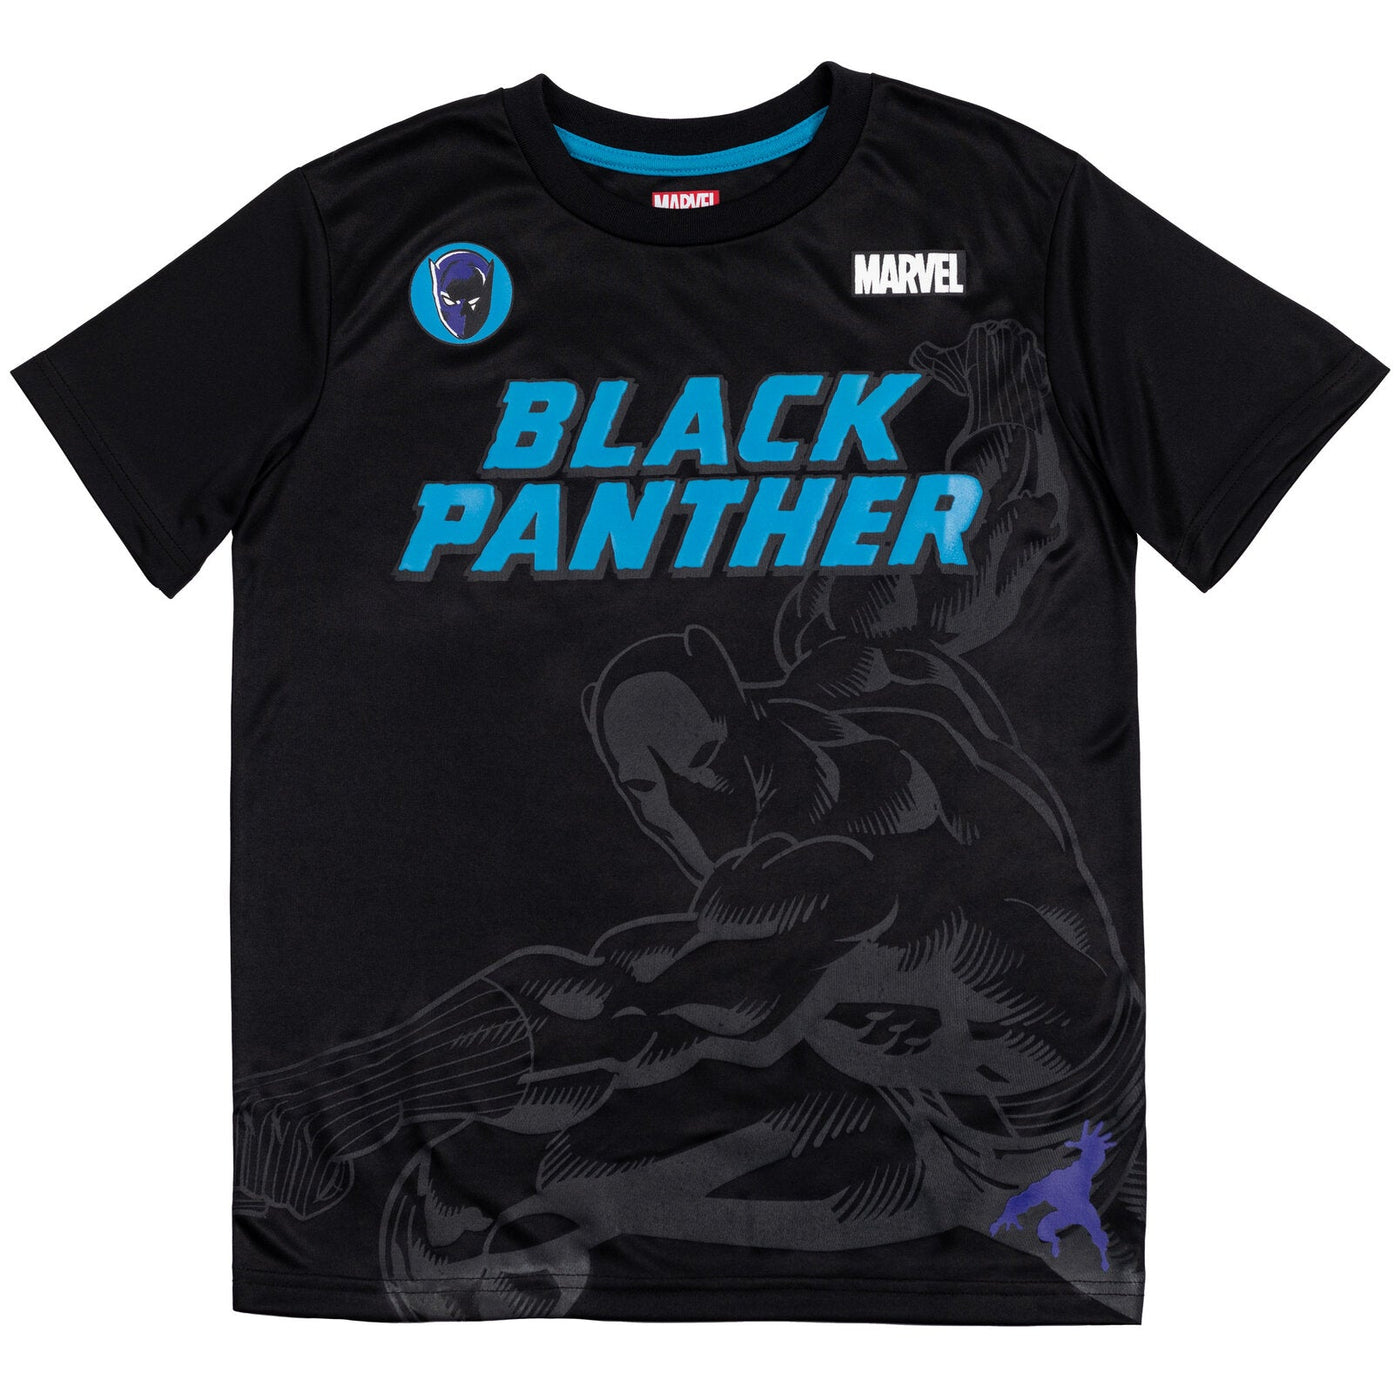 Marvel Avengers Black Panther T-Shirt and Mesh Shorts Outfit Set - imagikids